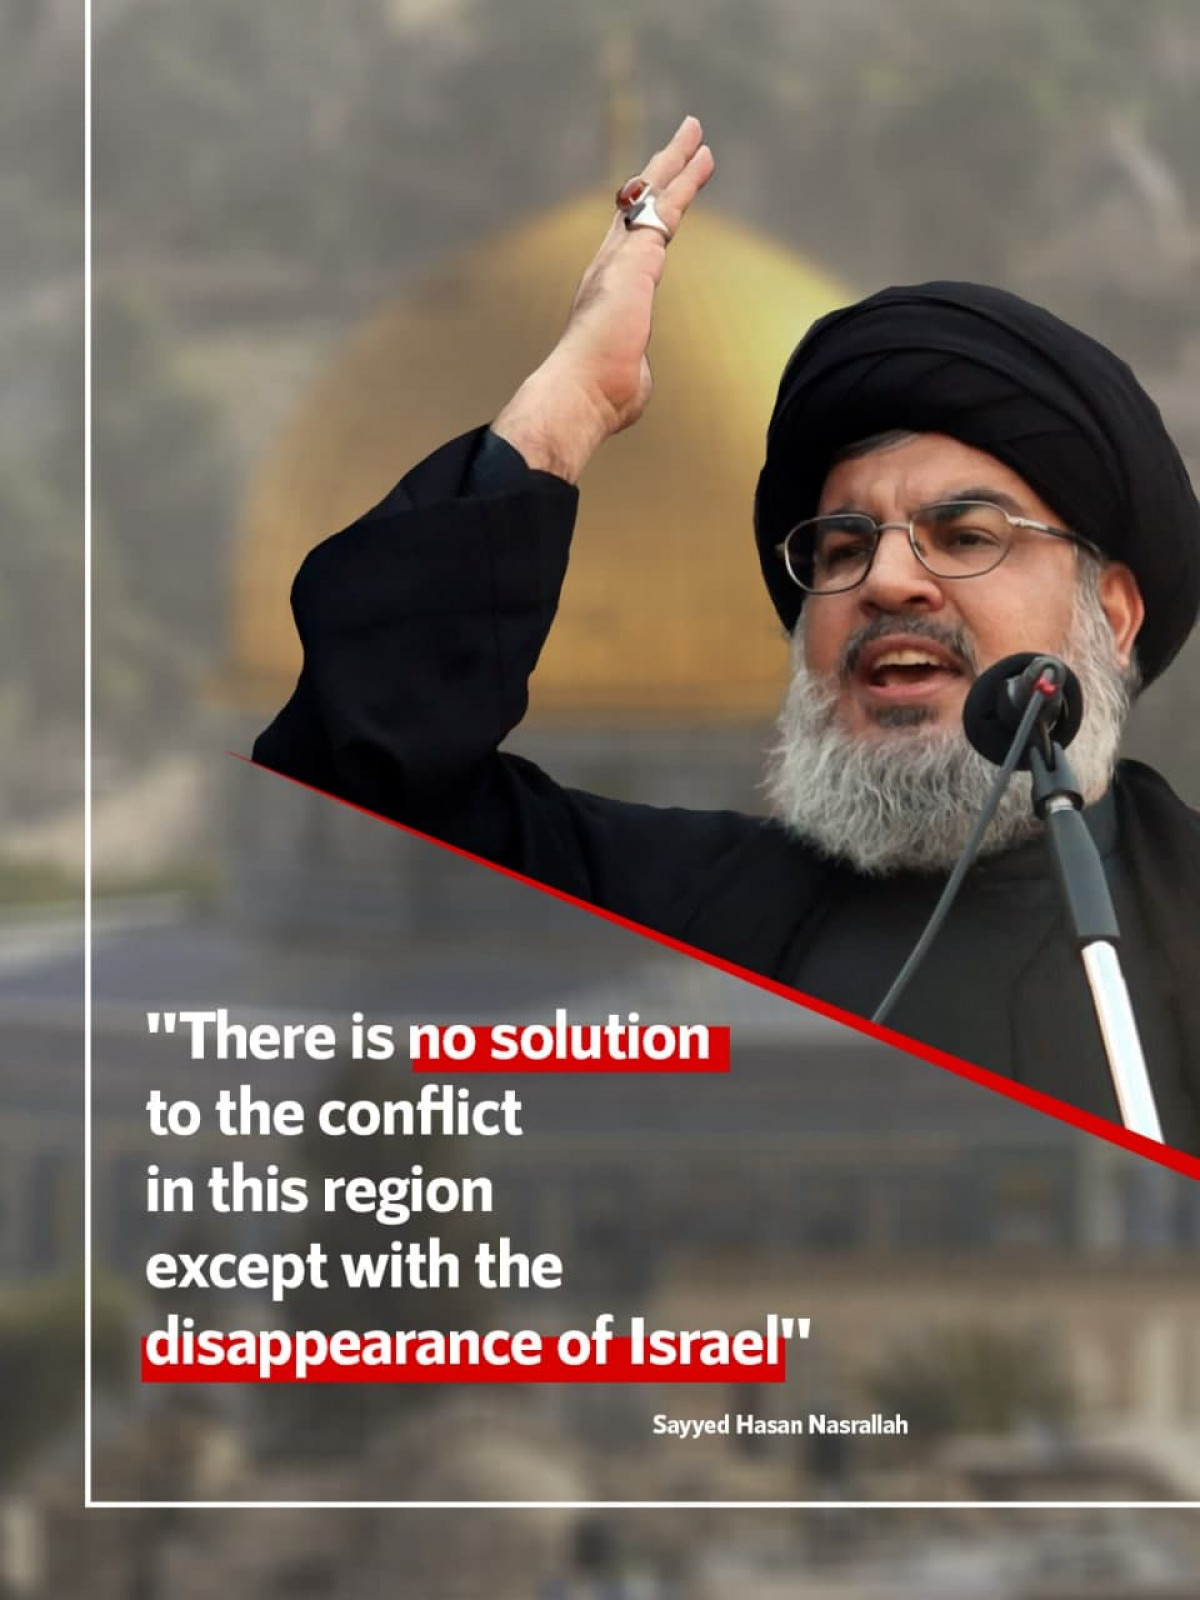 There is no solution to the conflict in this region except with the disappearance of Israel